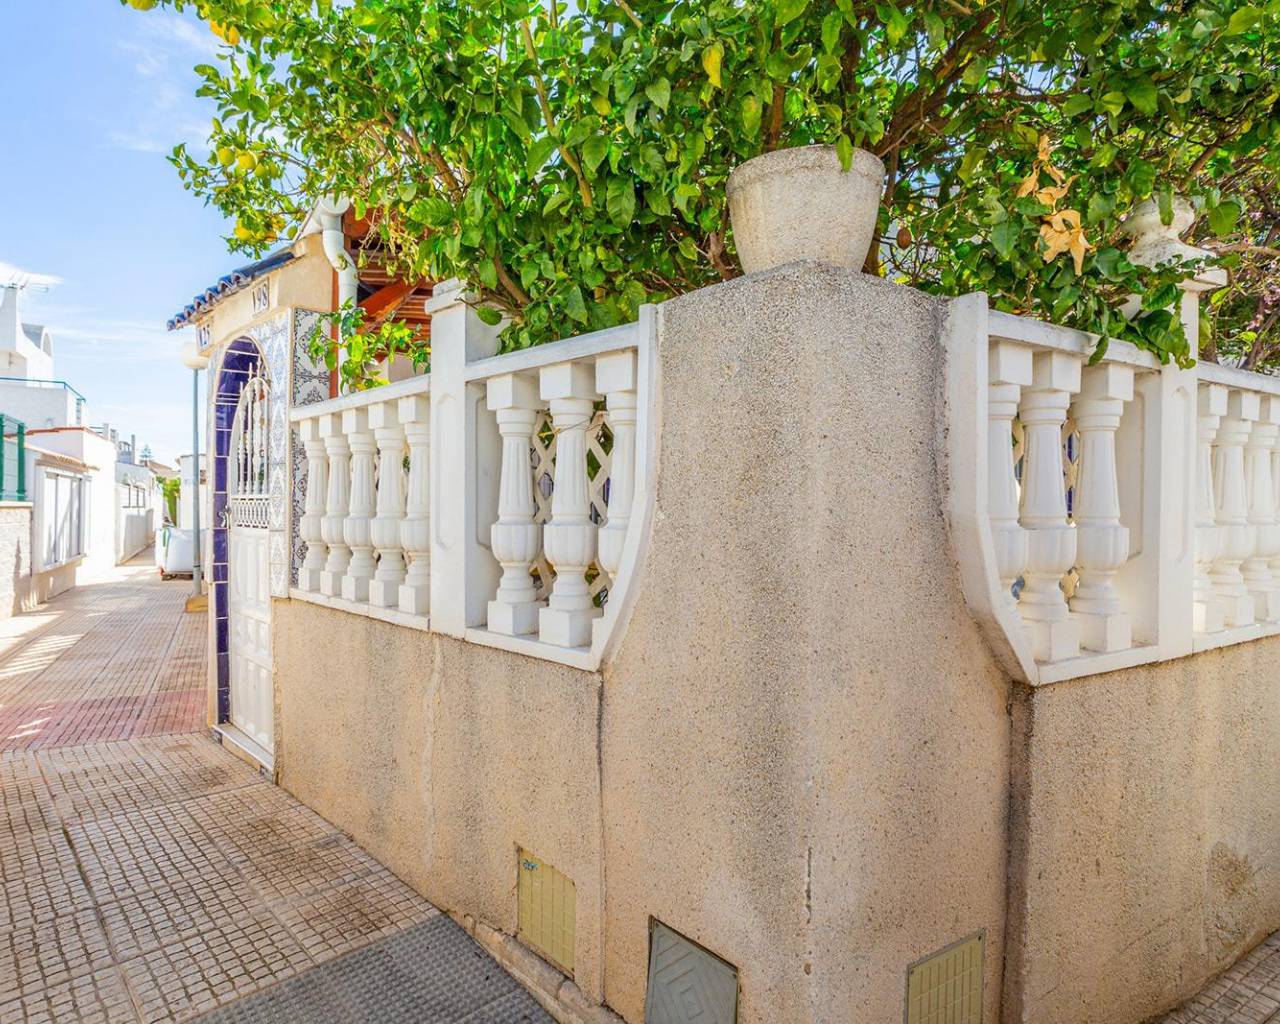 Sale - Maison individuelle - Torrevieja - Doña ines